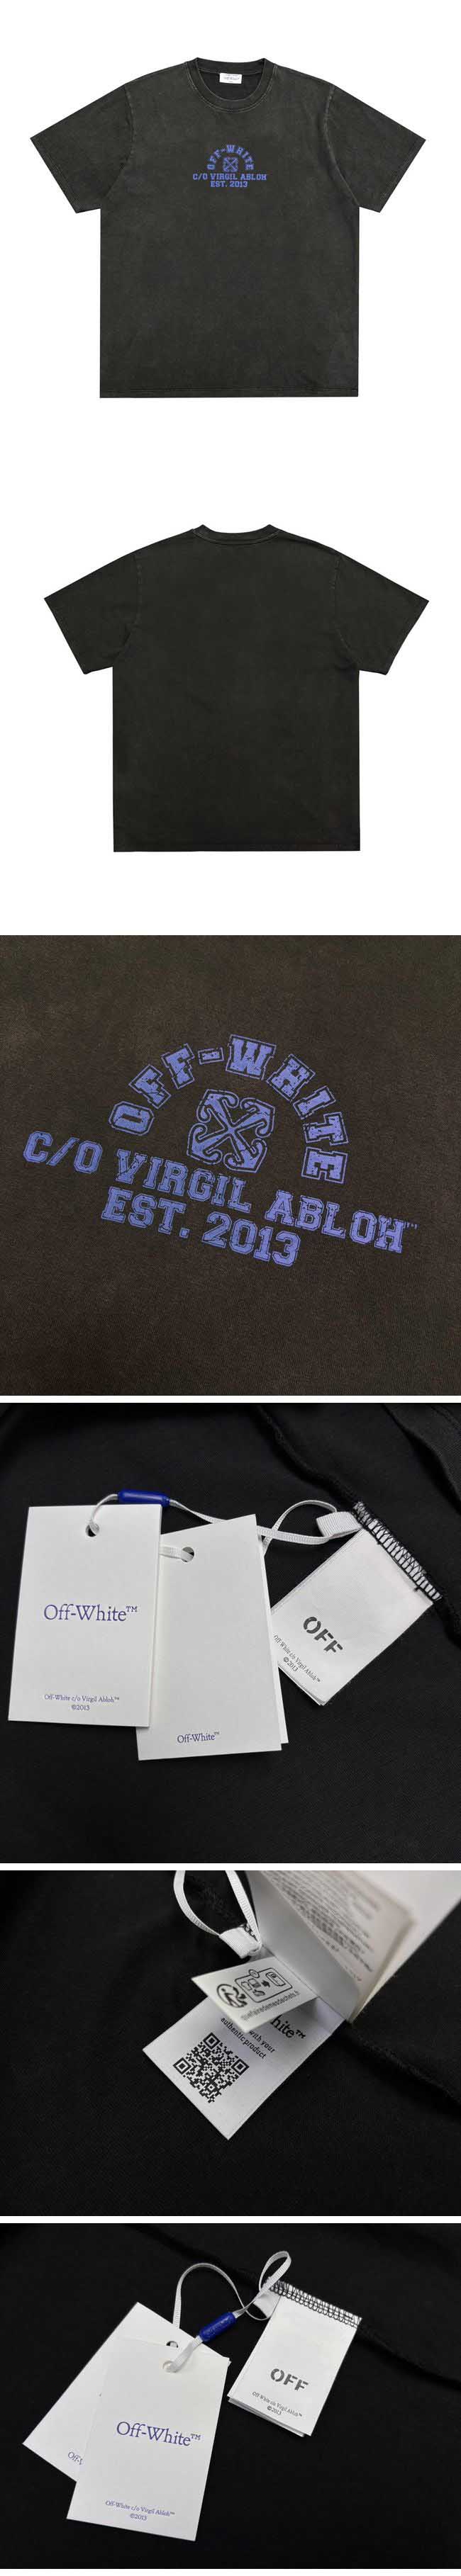 Off-White Virgil Abloh Washed college Logo Tee オフホワイト ヴァージルアブロー ウォッシュド カレッジロゴ Tシャツ